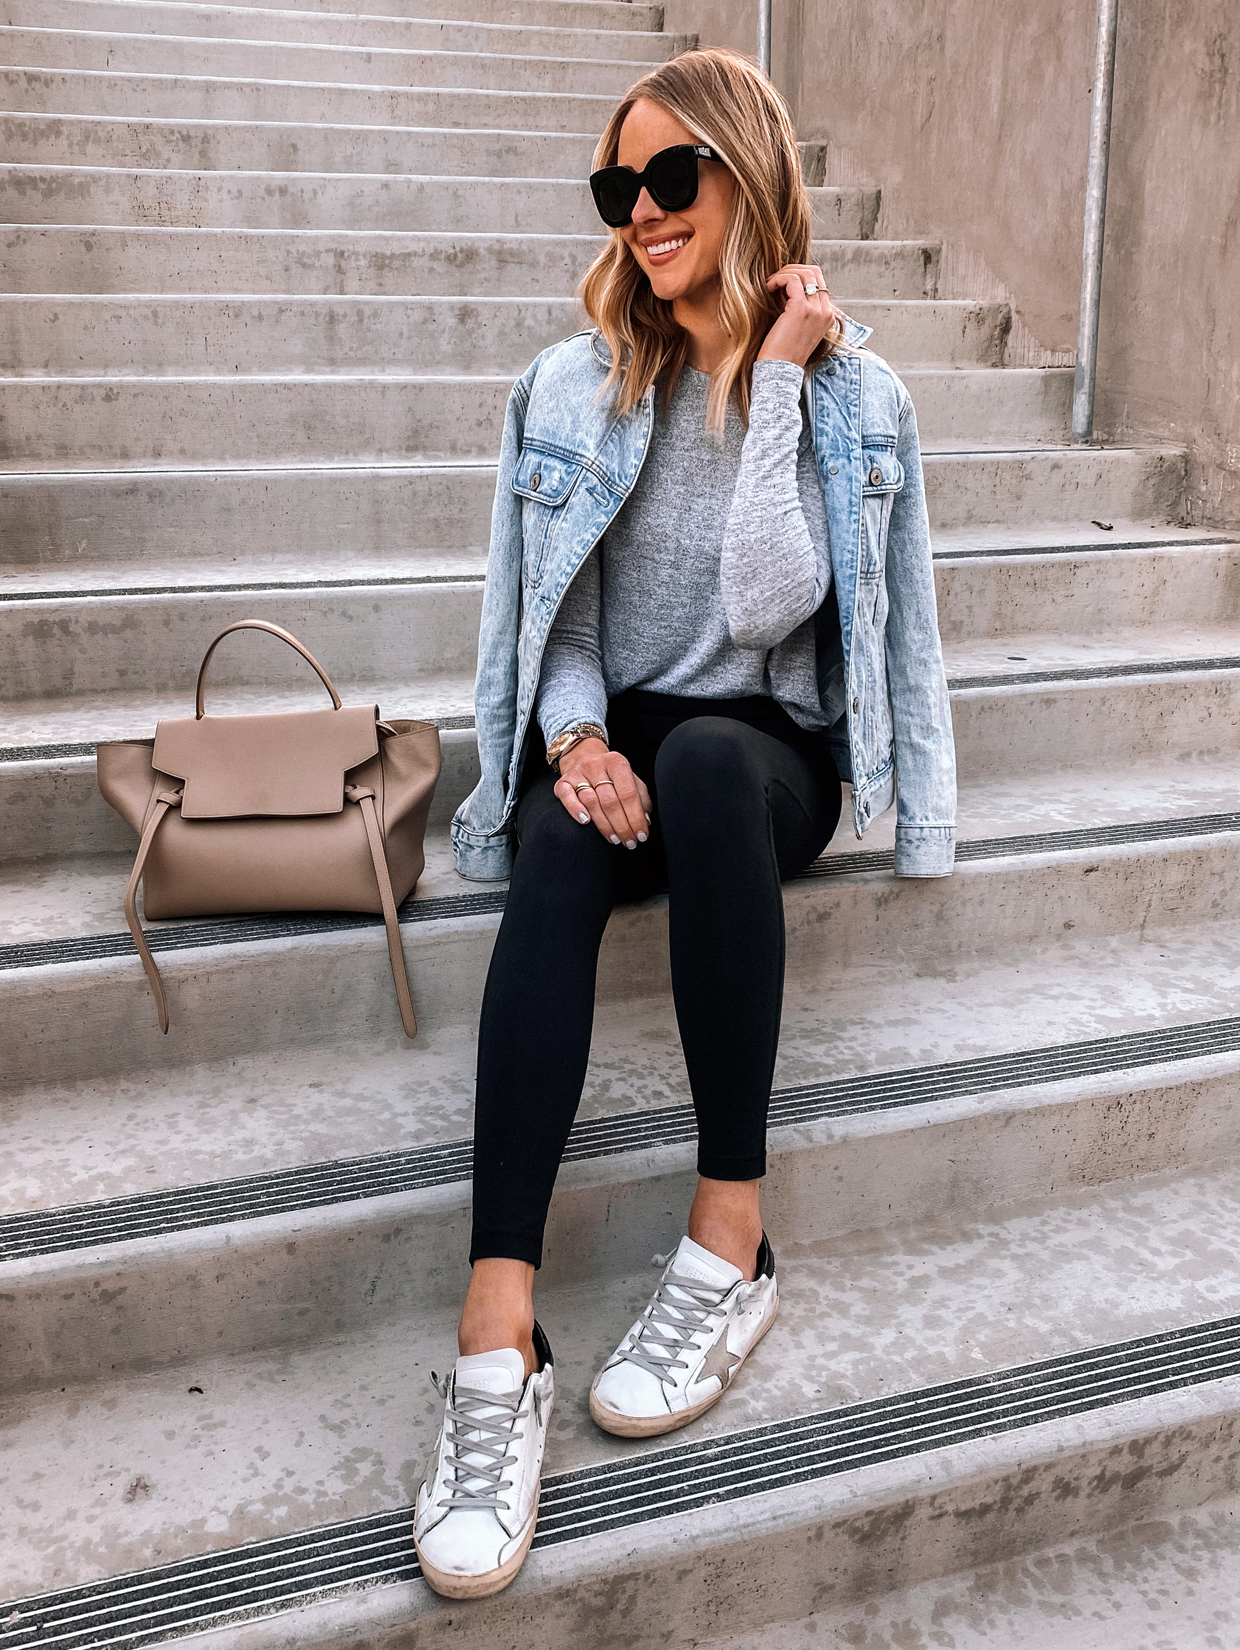 How To Style White Sneakers - Fashionable White Sneaker Outfits